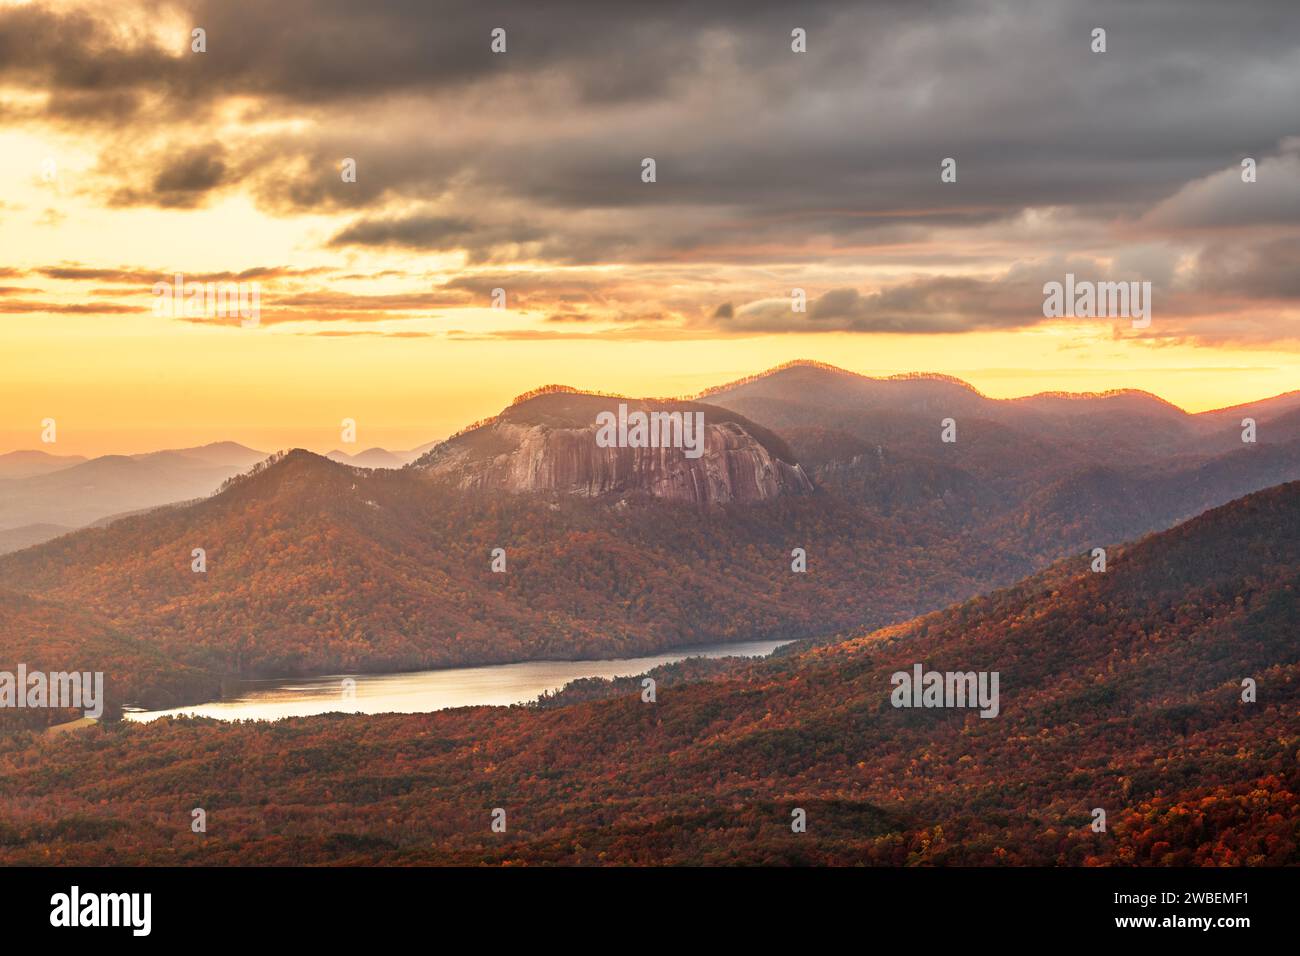 Table Rock State Park, South Carolina, USA at dusk in autumn. Stock Photo